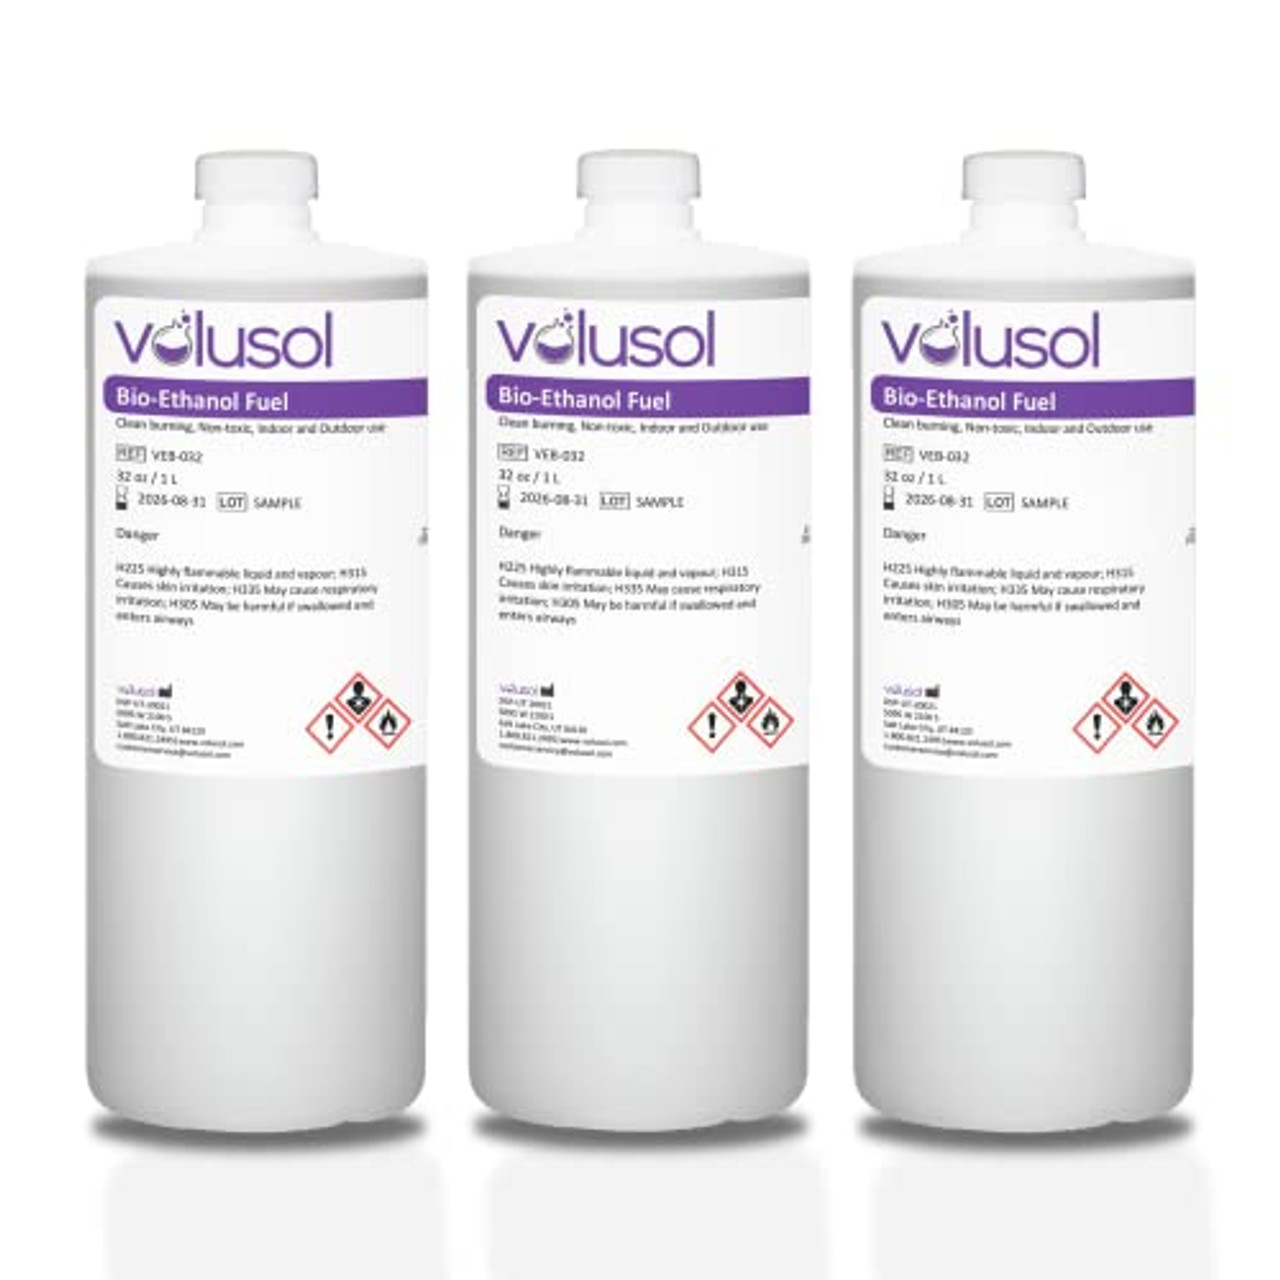 Fireplace Fuel, Ventless, Bio-Ethanol, Clean Burning/Eco-Friendly (1000mL  /32 oz.) (Pack of 3)